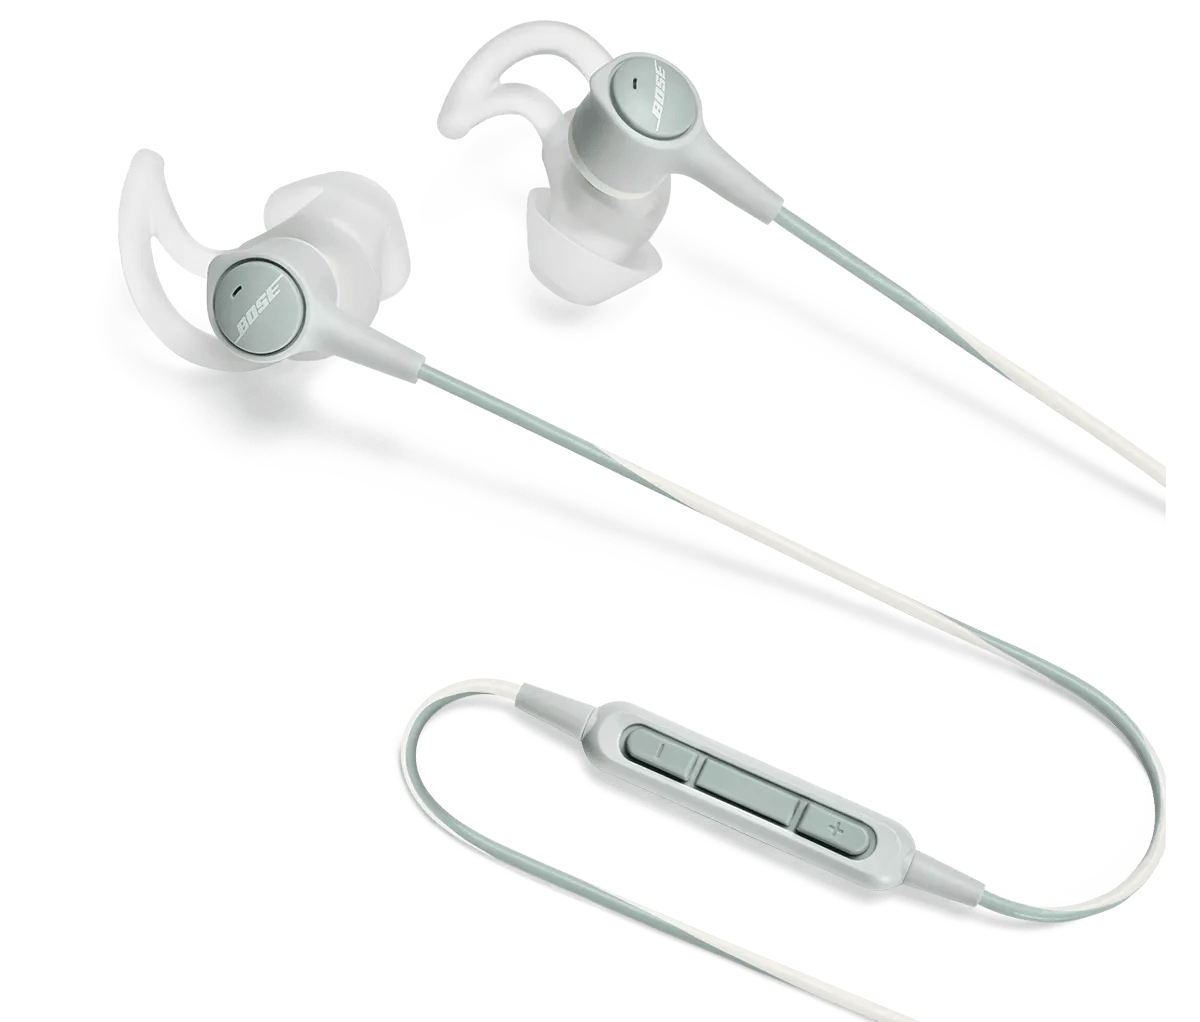 SoundTrue® Ultra in-ear headphones – Apple® devices | Bose Support